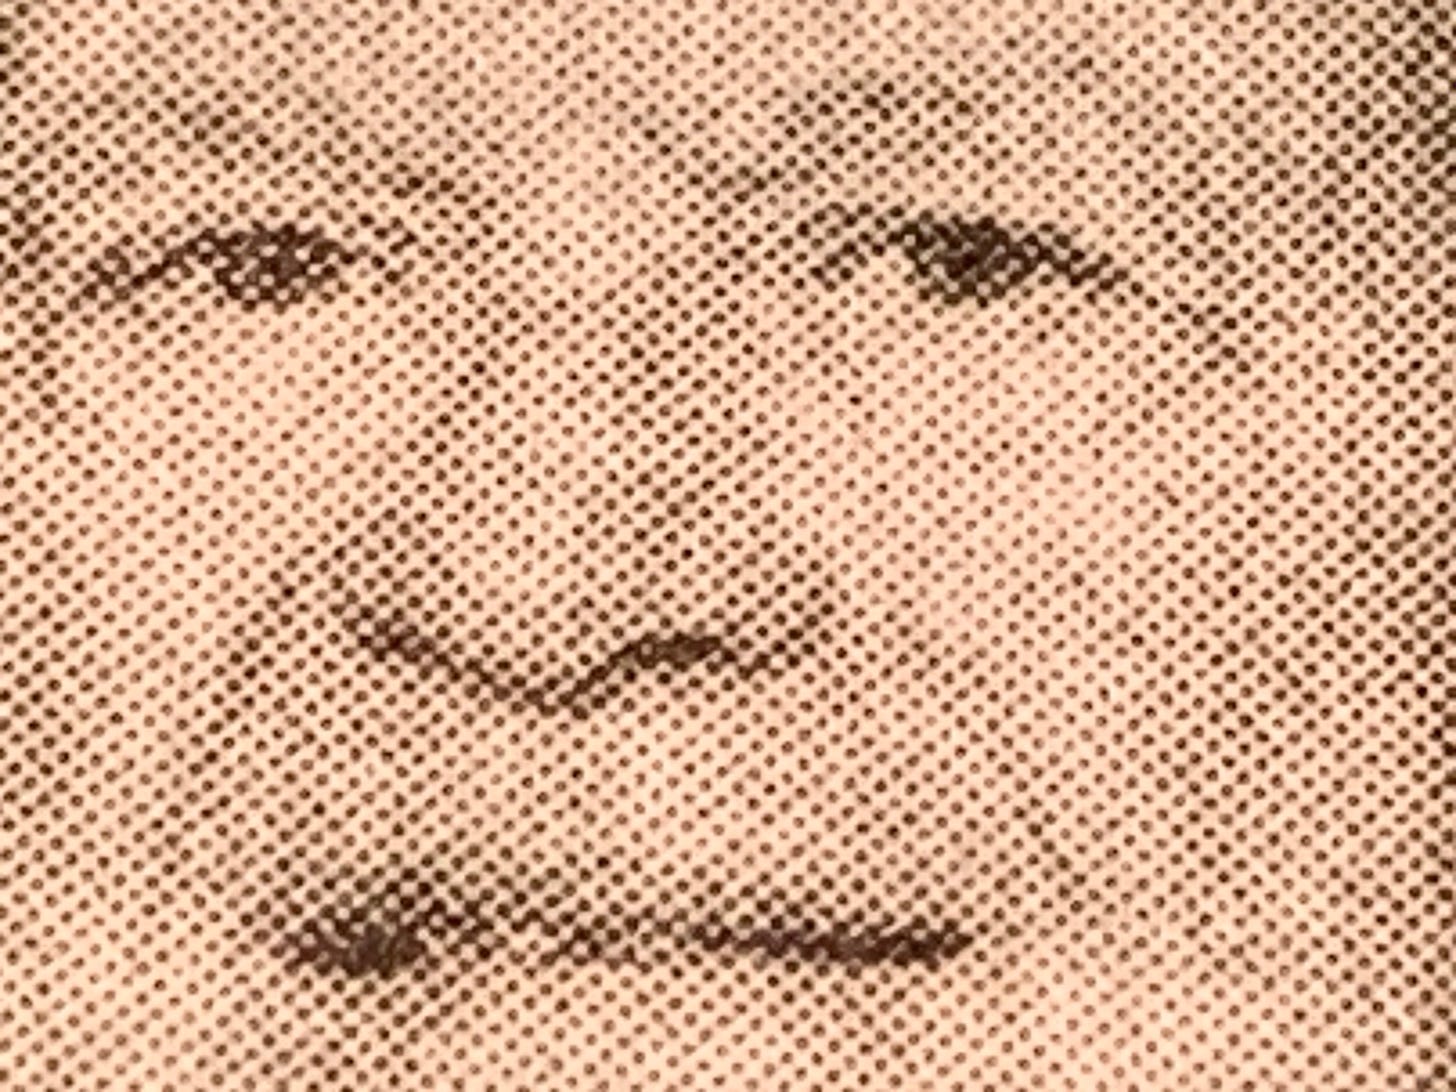 An extreme closeup detail of a photograph of Associate Justice of the Supreme Court of the United States Samuel Alito in the print edition of the New York Times.